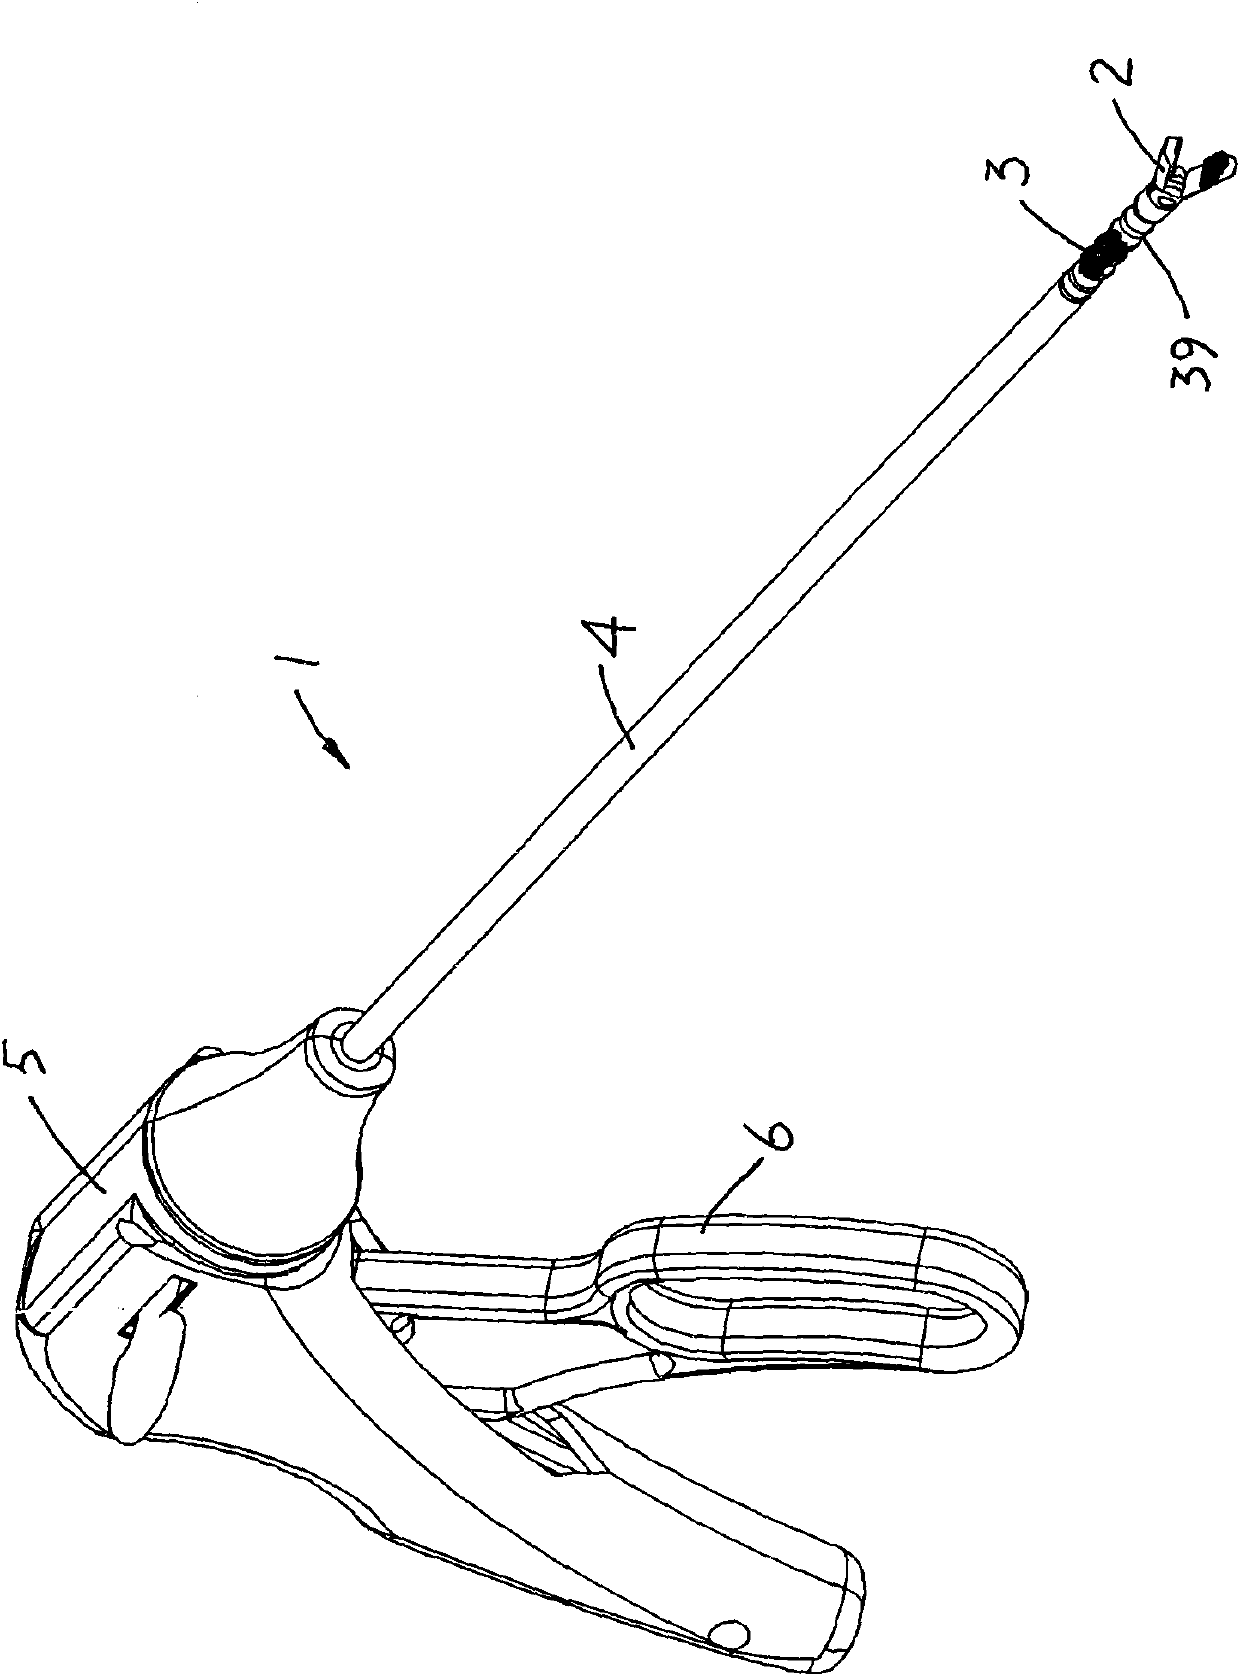 Minimally invasive surgical apparatus provided with chain joints